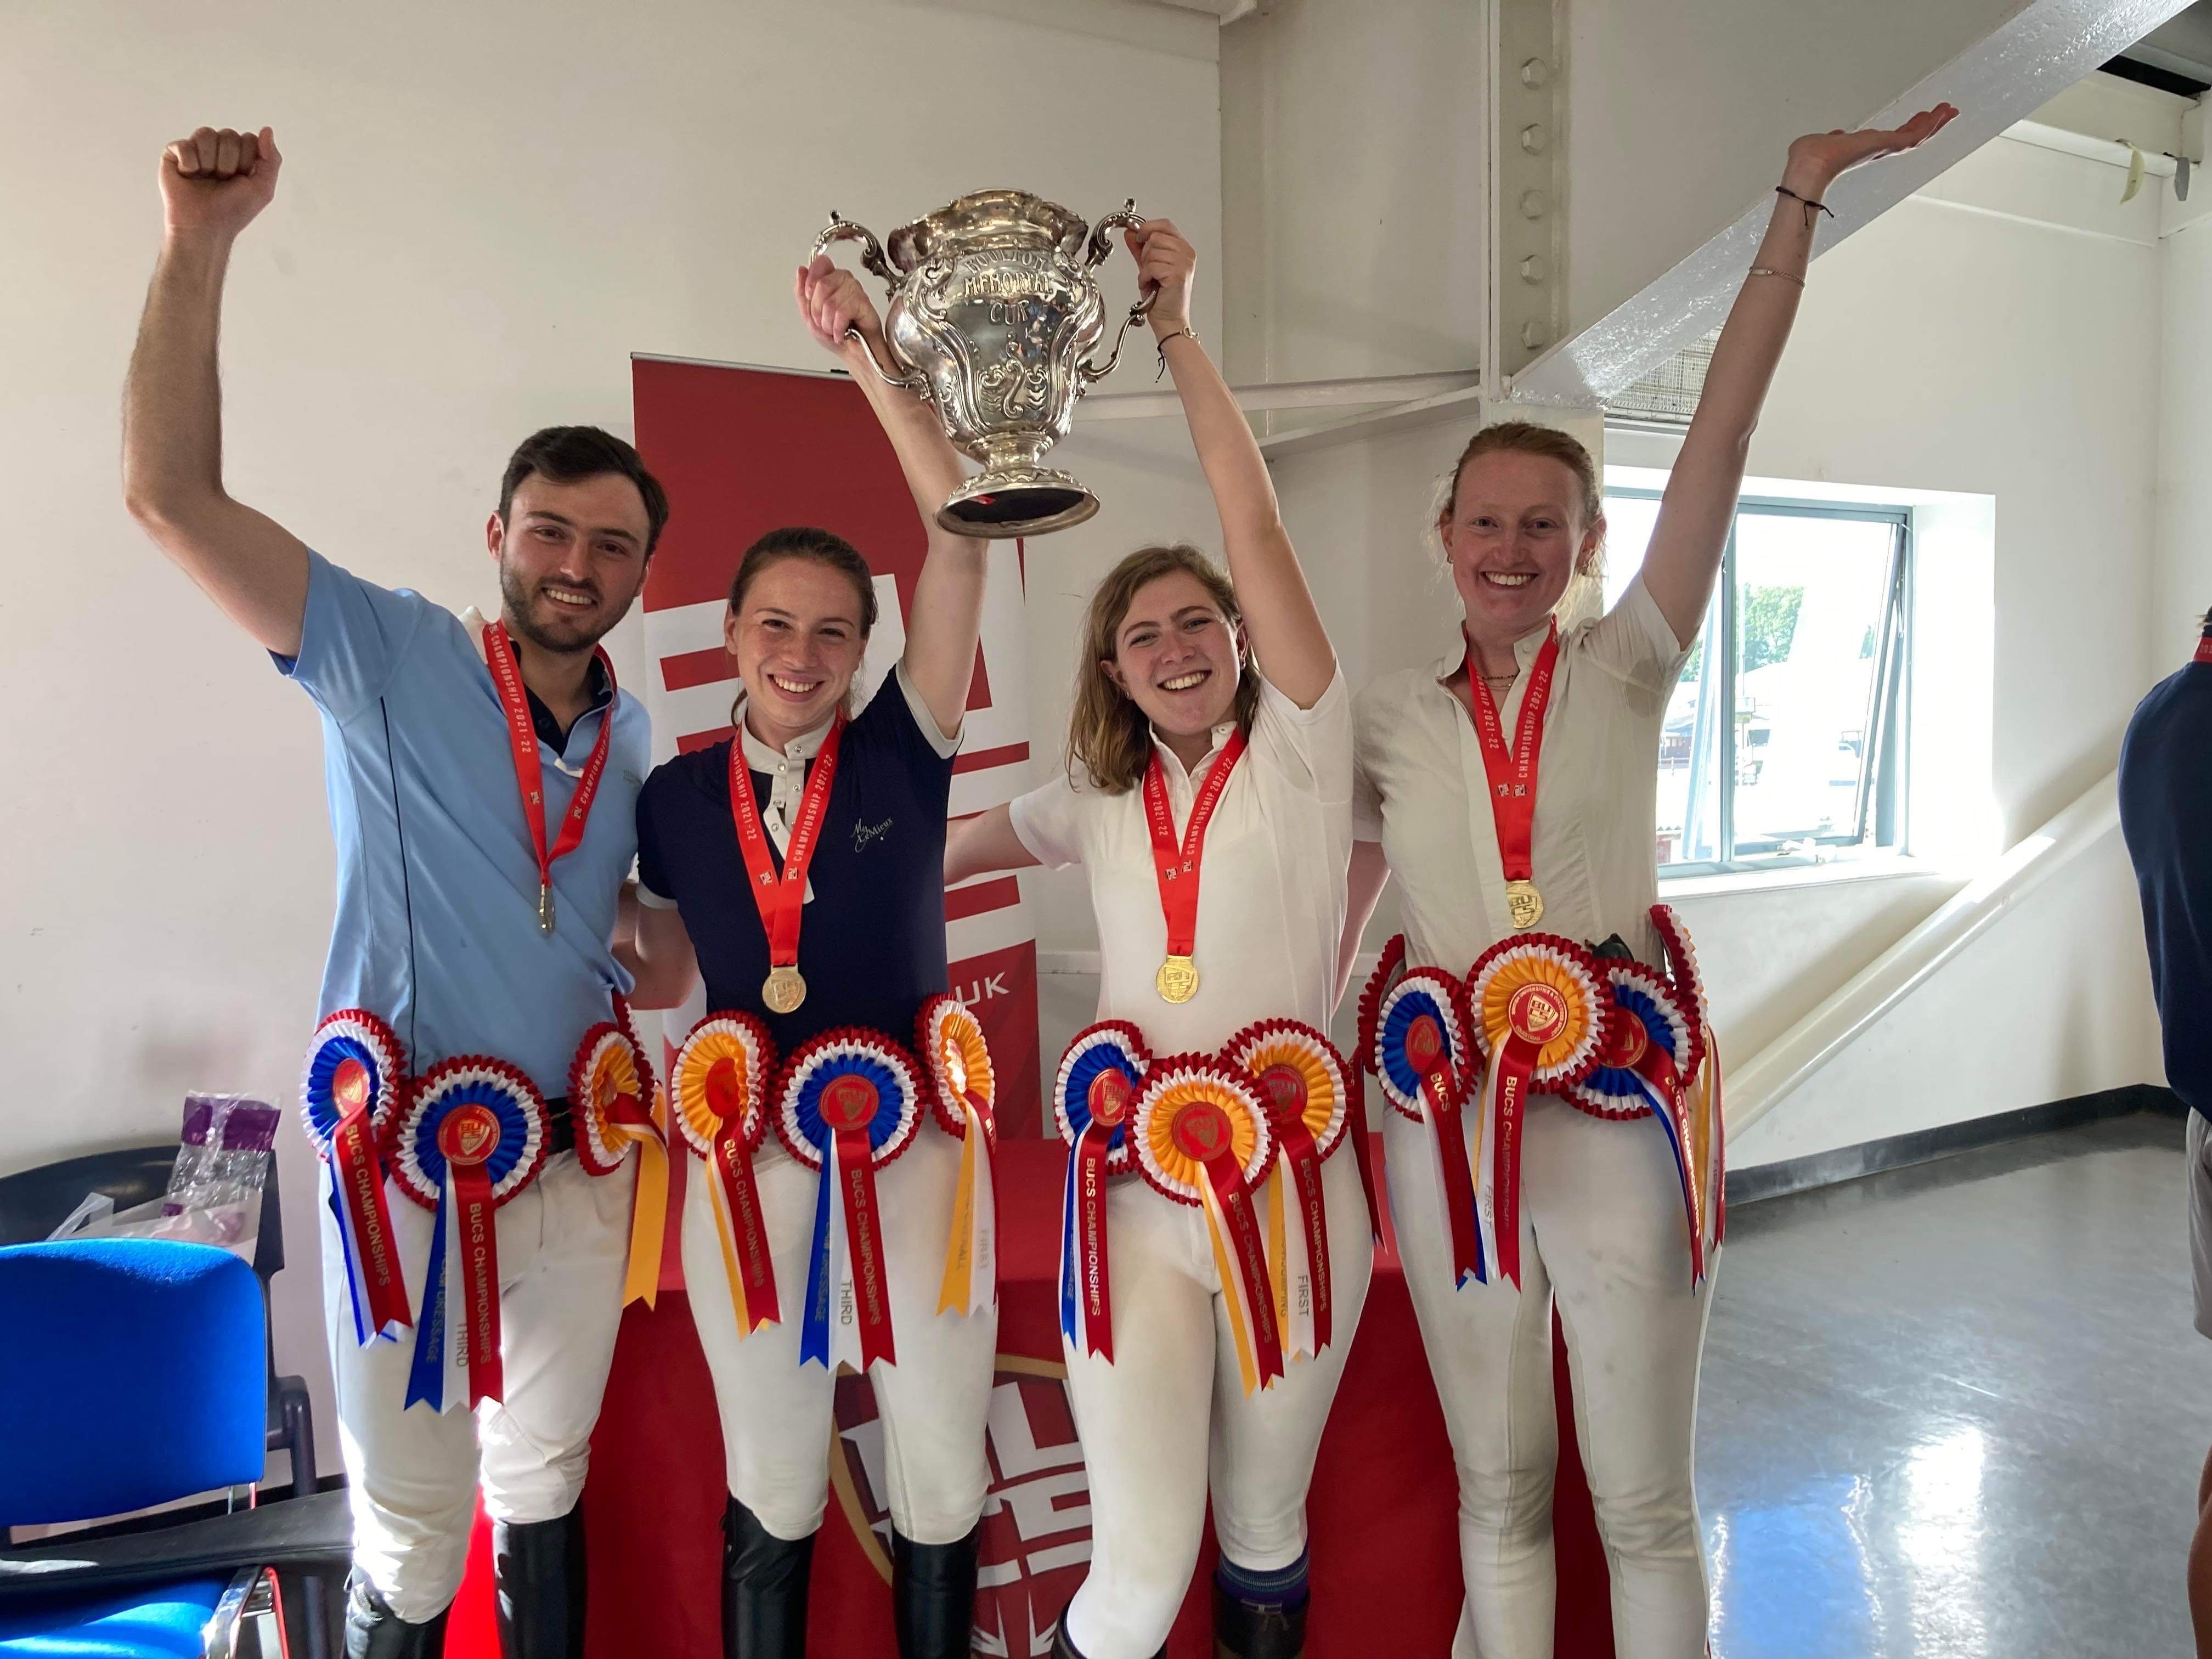 Chloe (centre, left) and Maaike (centre, right) are pictured holding their trophy aloft with team mates Lydia Collas and Manuel Fernandez at the championships.  